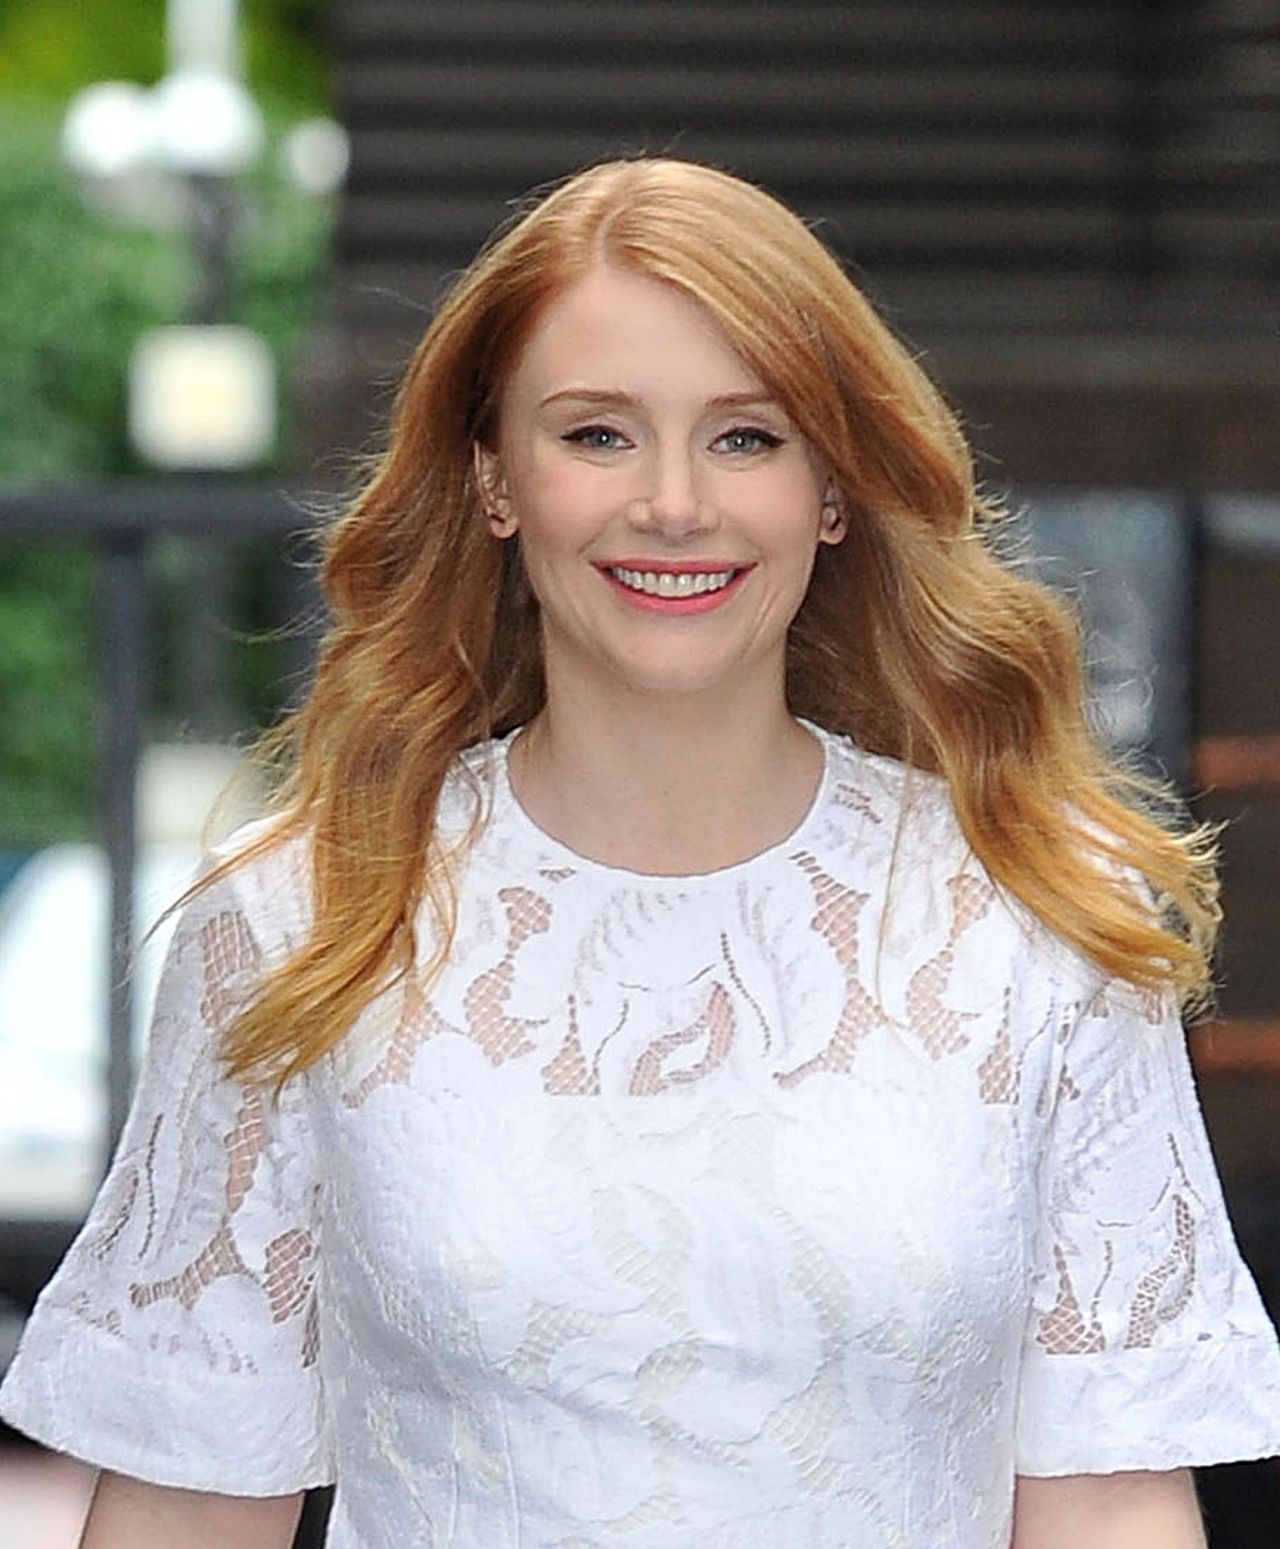 Albums 95+ Images photos of bryce dallas howard Latest